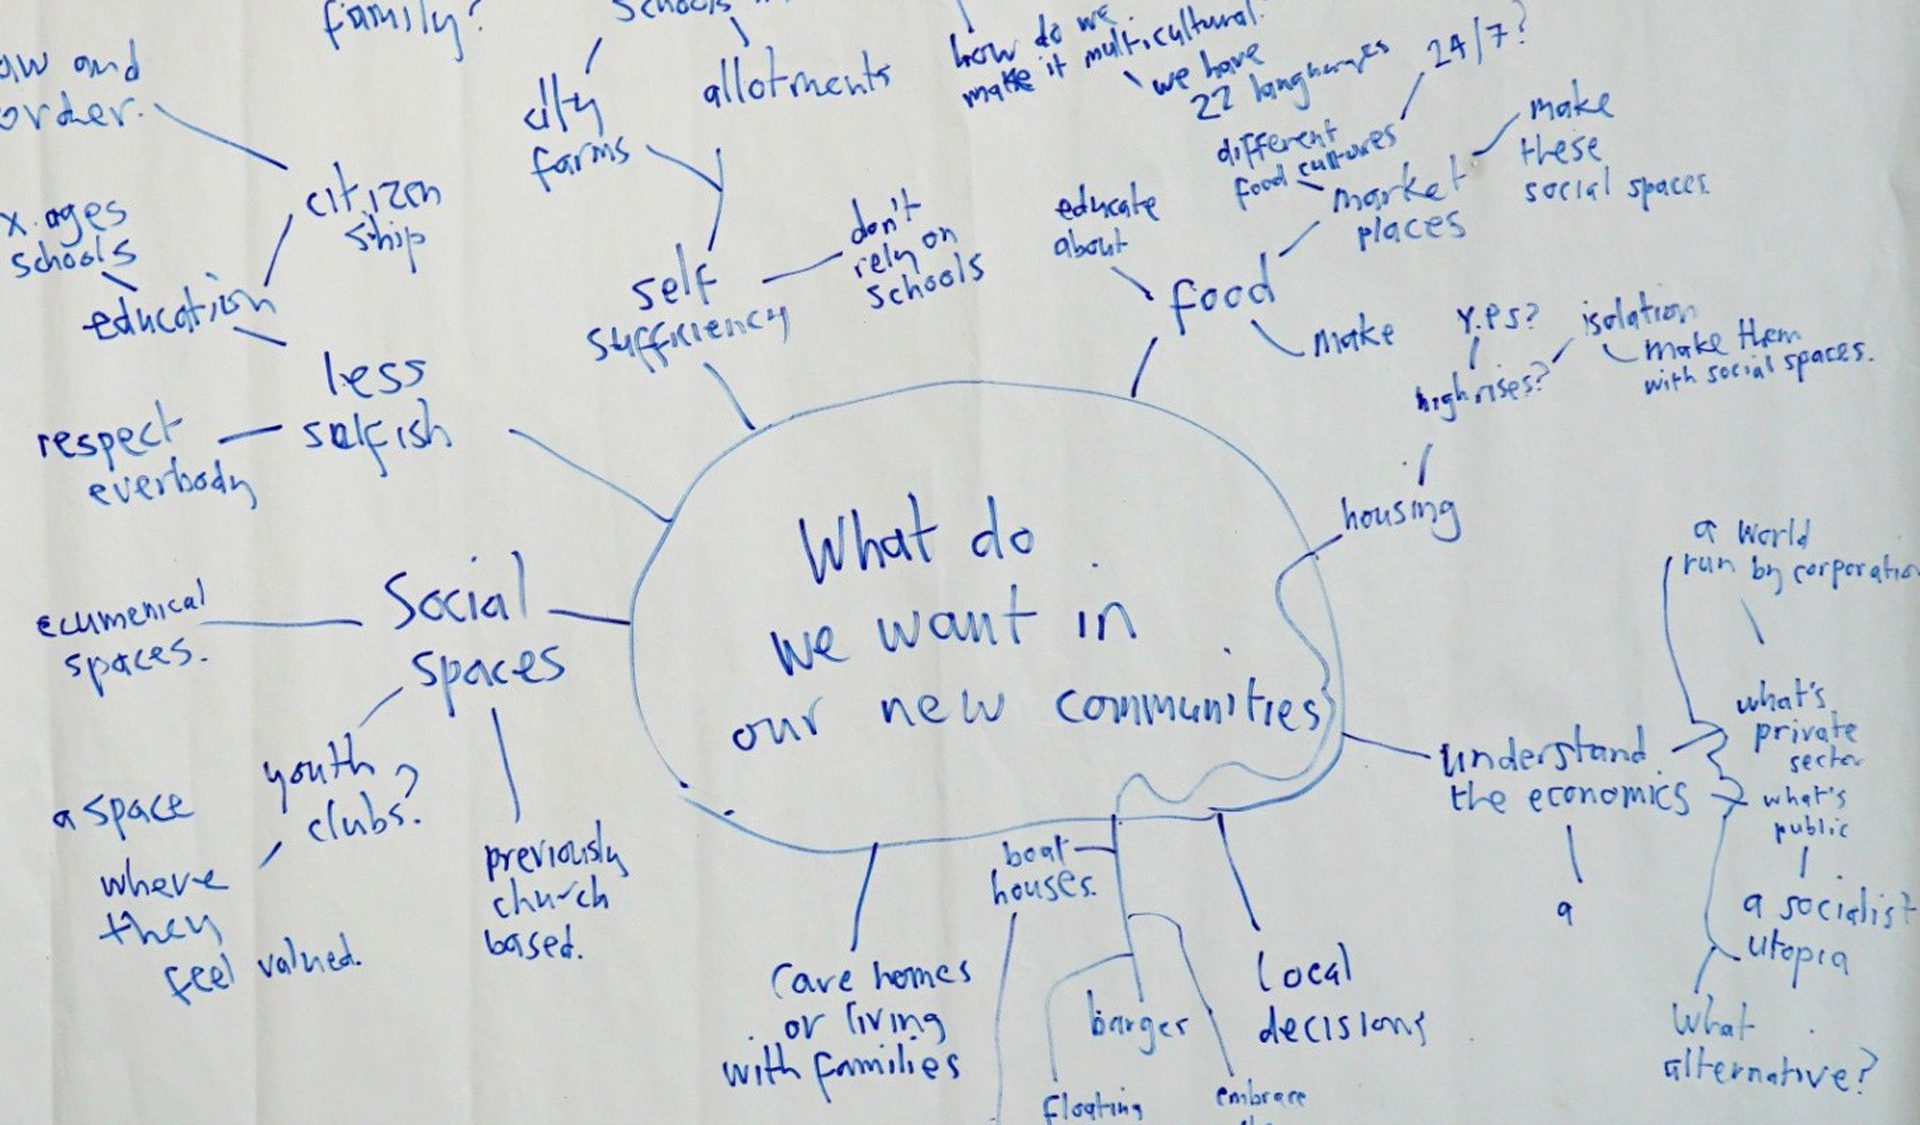 Diagram titled what do we want in our new communities